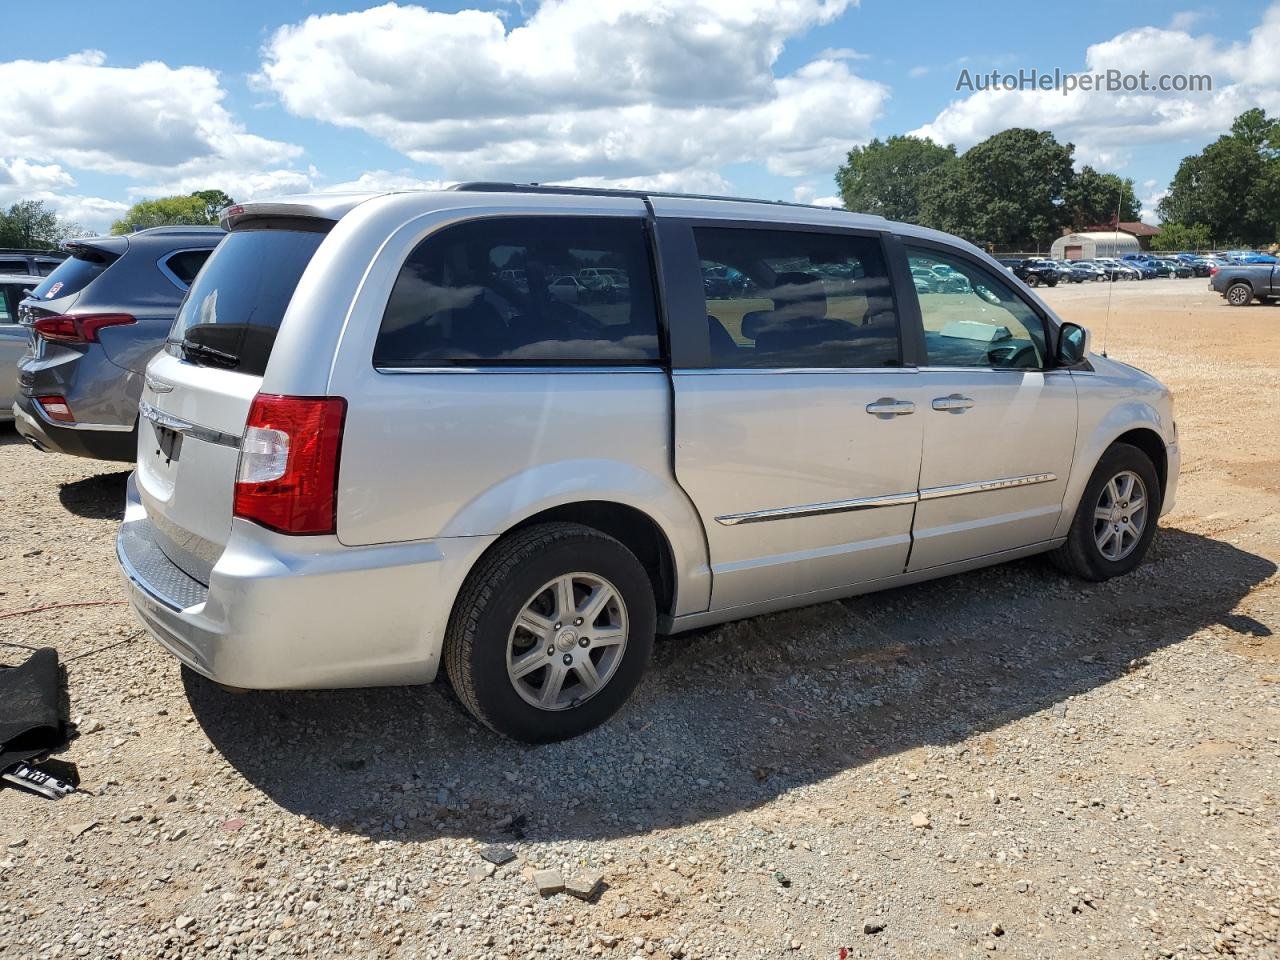 2011 Chrysler Town & Country Touring Silver vin: 2A4RR5DG4BR744706